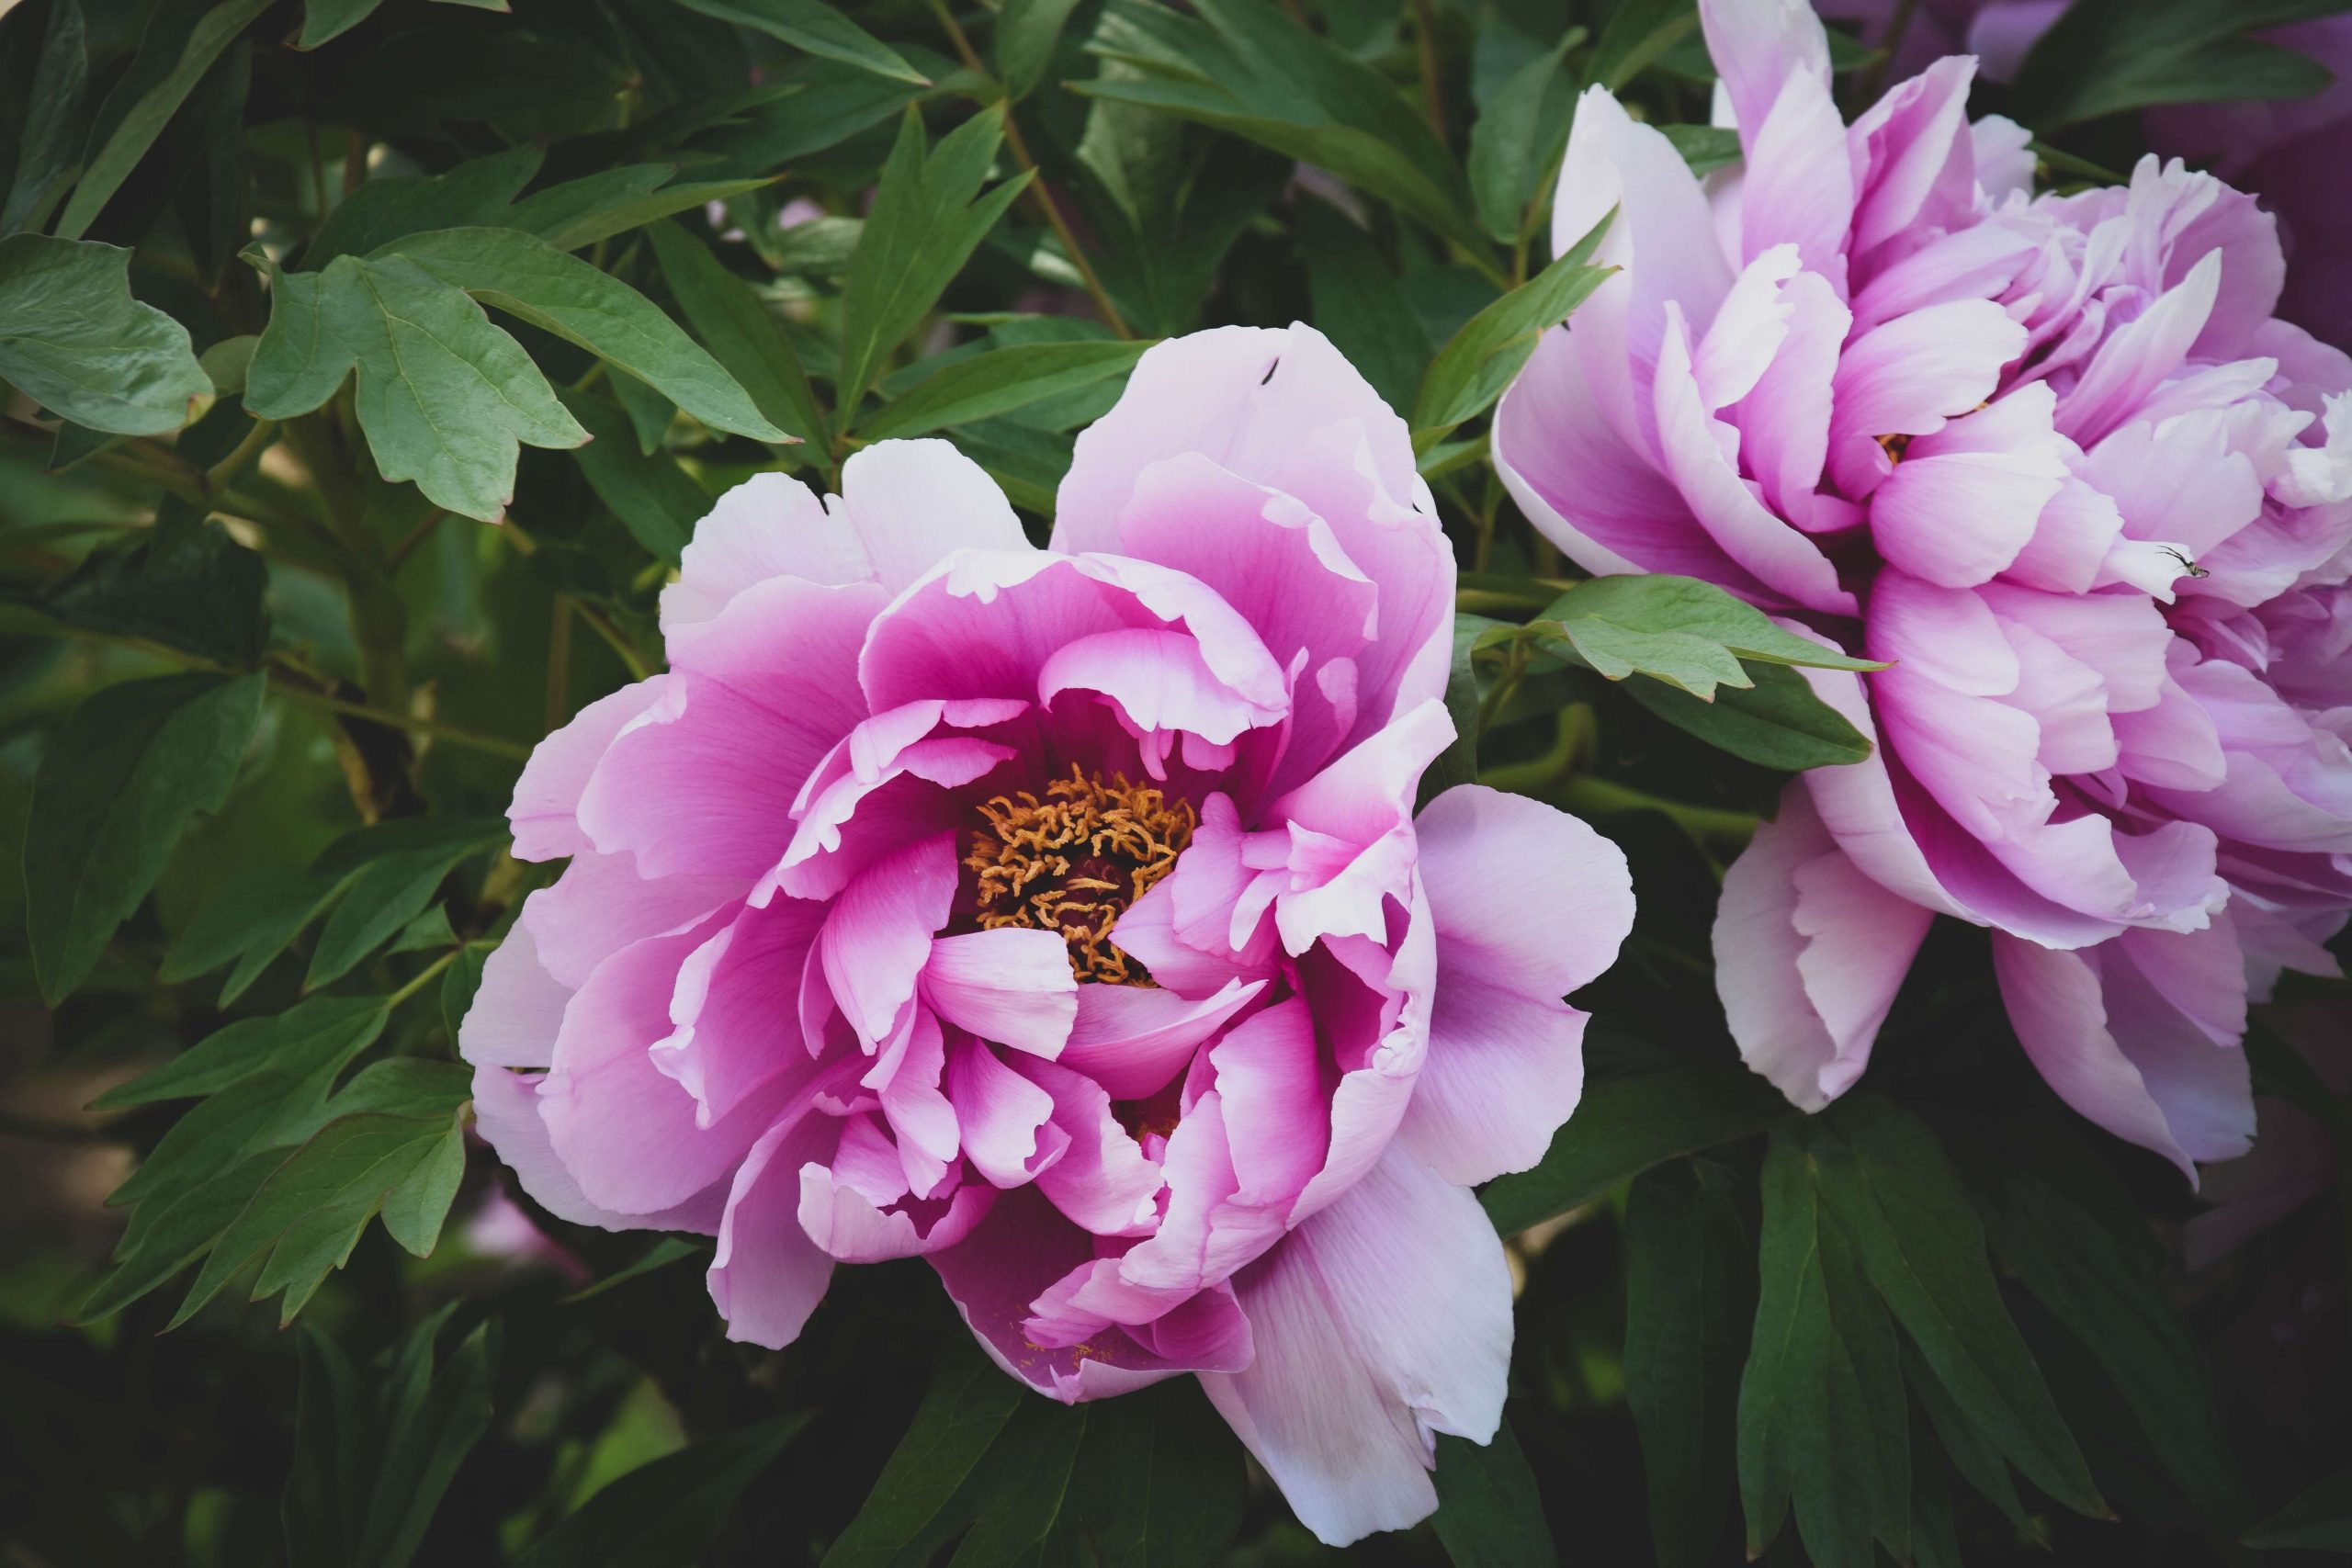 Tips for growing Peonies